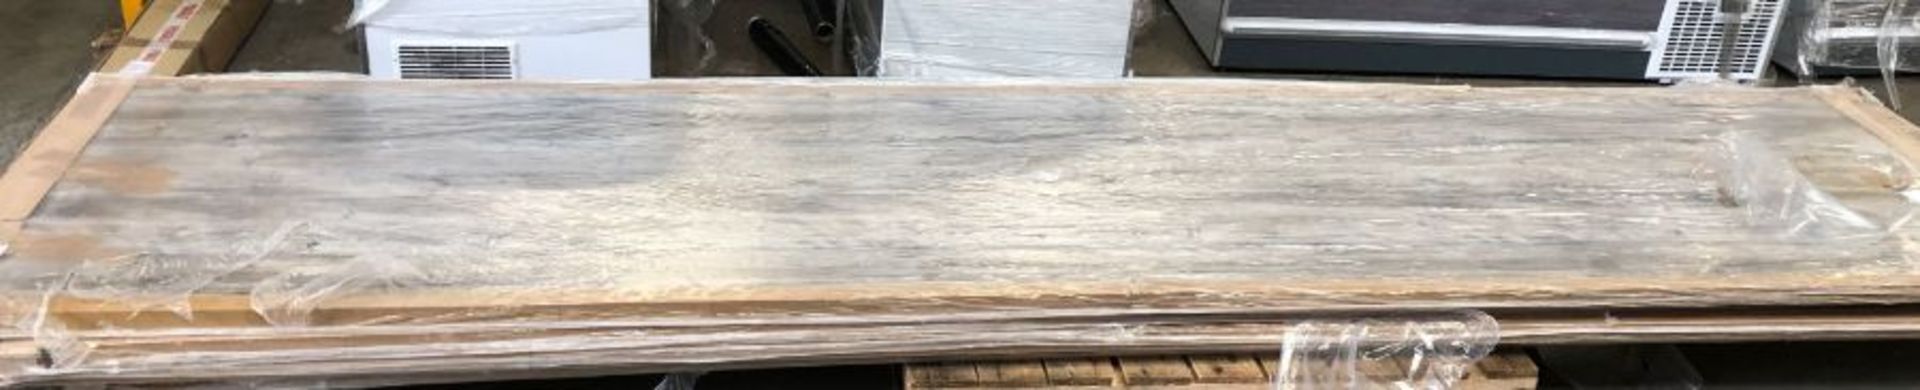 1 X 4M HIGH-END GERMAN KITCHEN WORKTOP, PONDEROSA PINE / SIZE: 4000mm X 900mm / RRP £620.00 / AS - Image 2 of 2